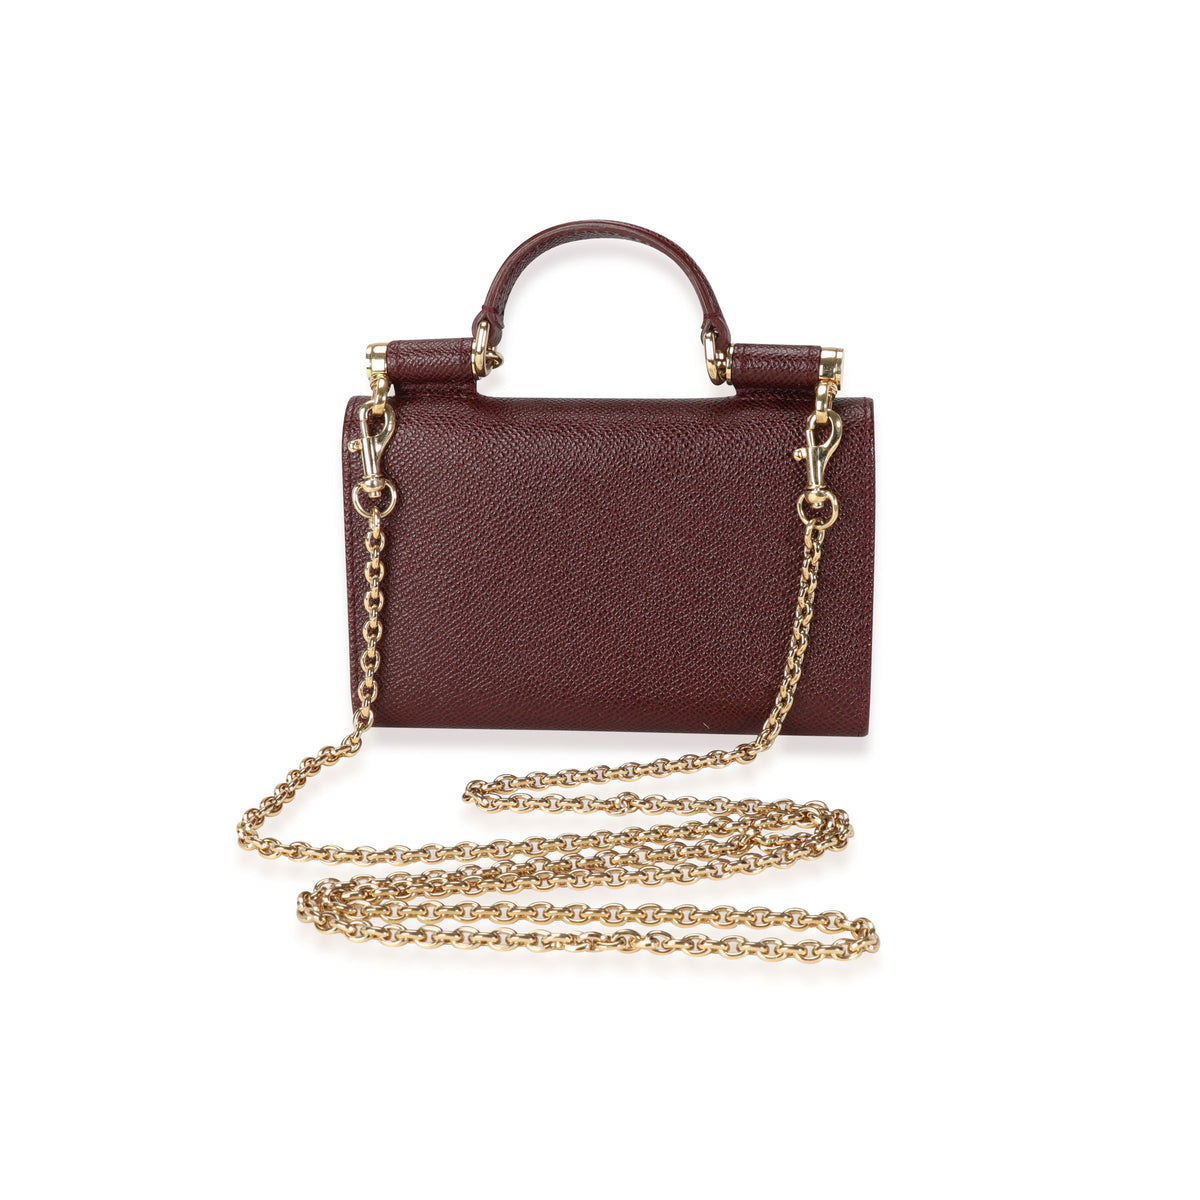 Dolce & Gabbana Maroon Leather Miss Sicily Wallet On Chain